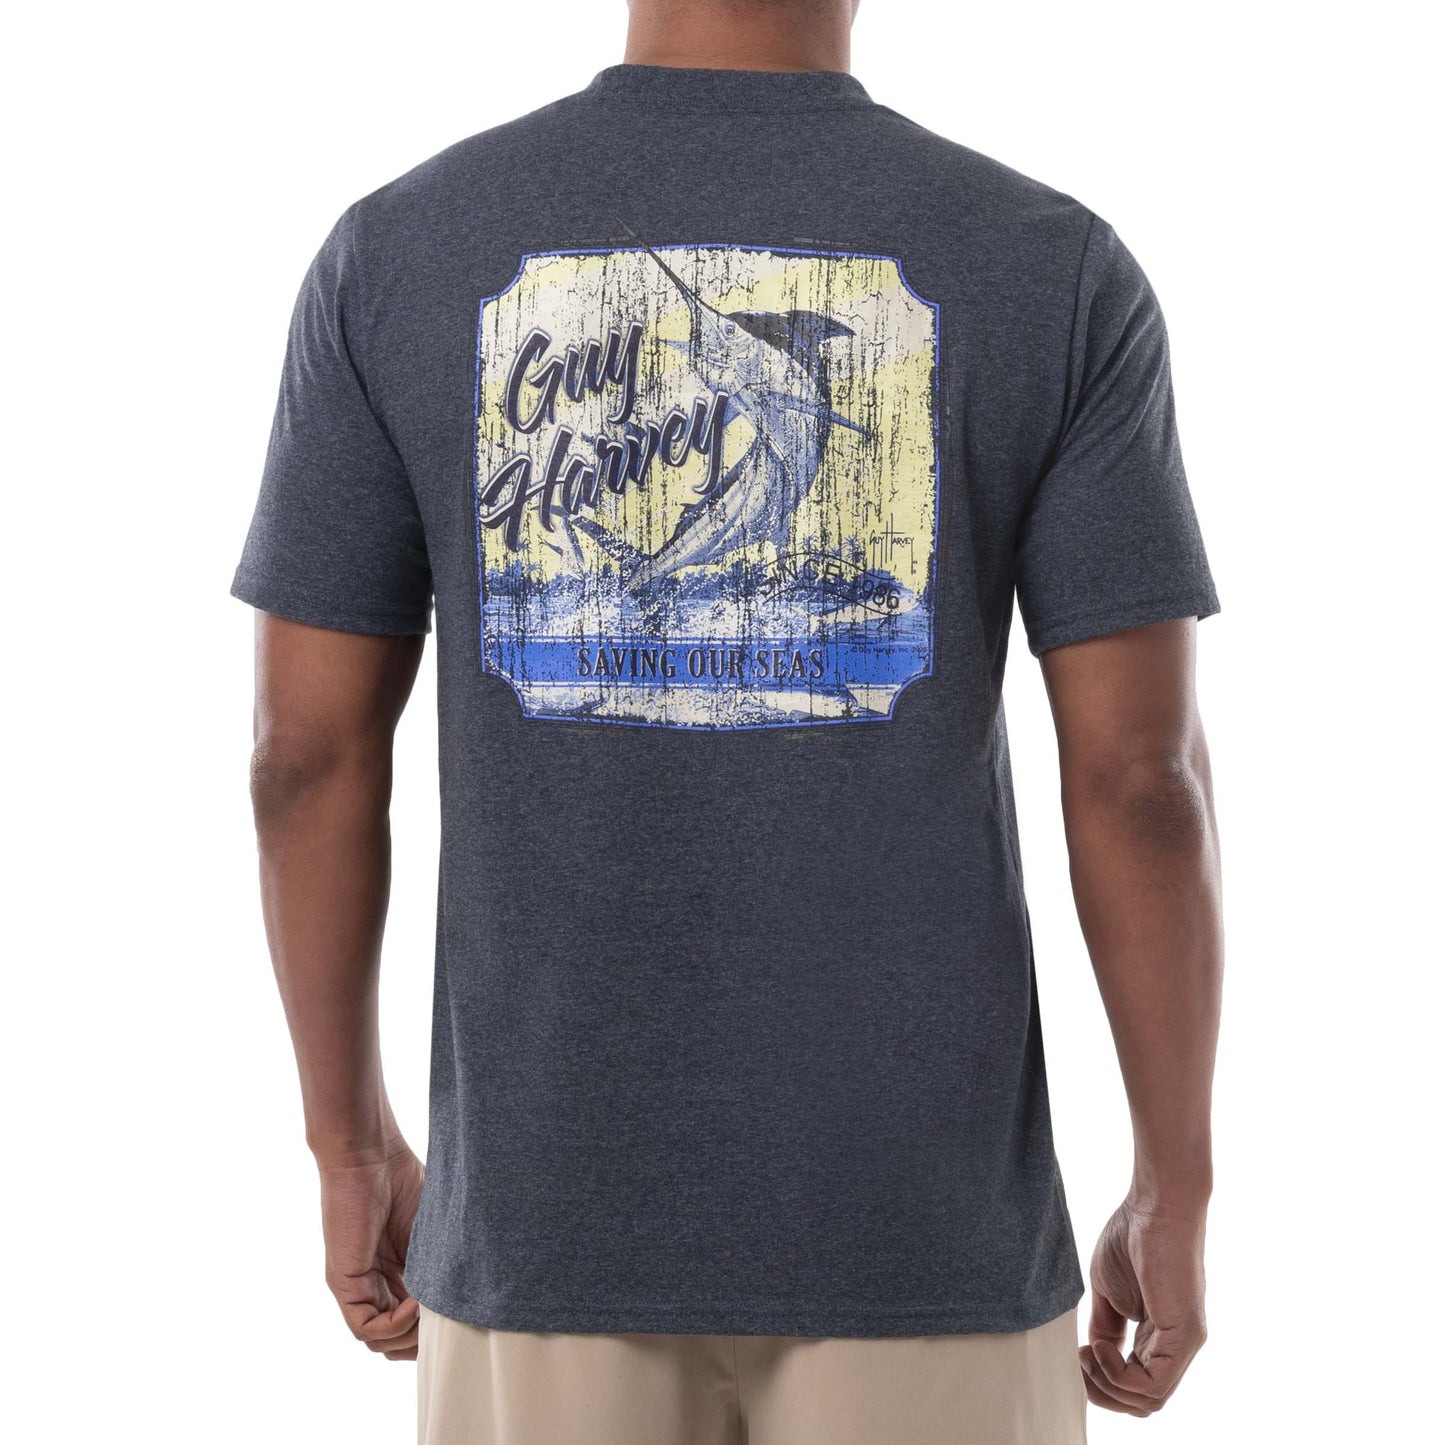 Men's Saving Our Seas Threadcycled Short Sleeve Pocket T-Shirt View 1